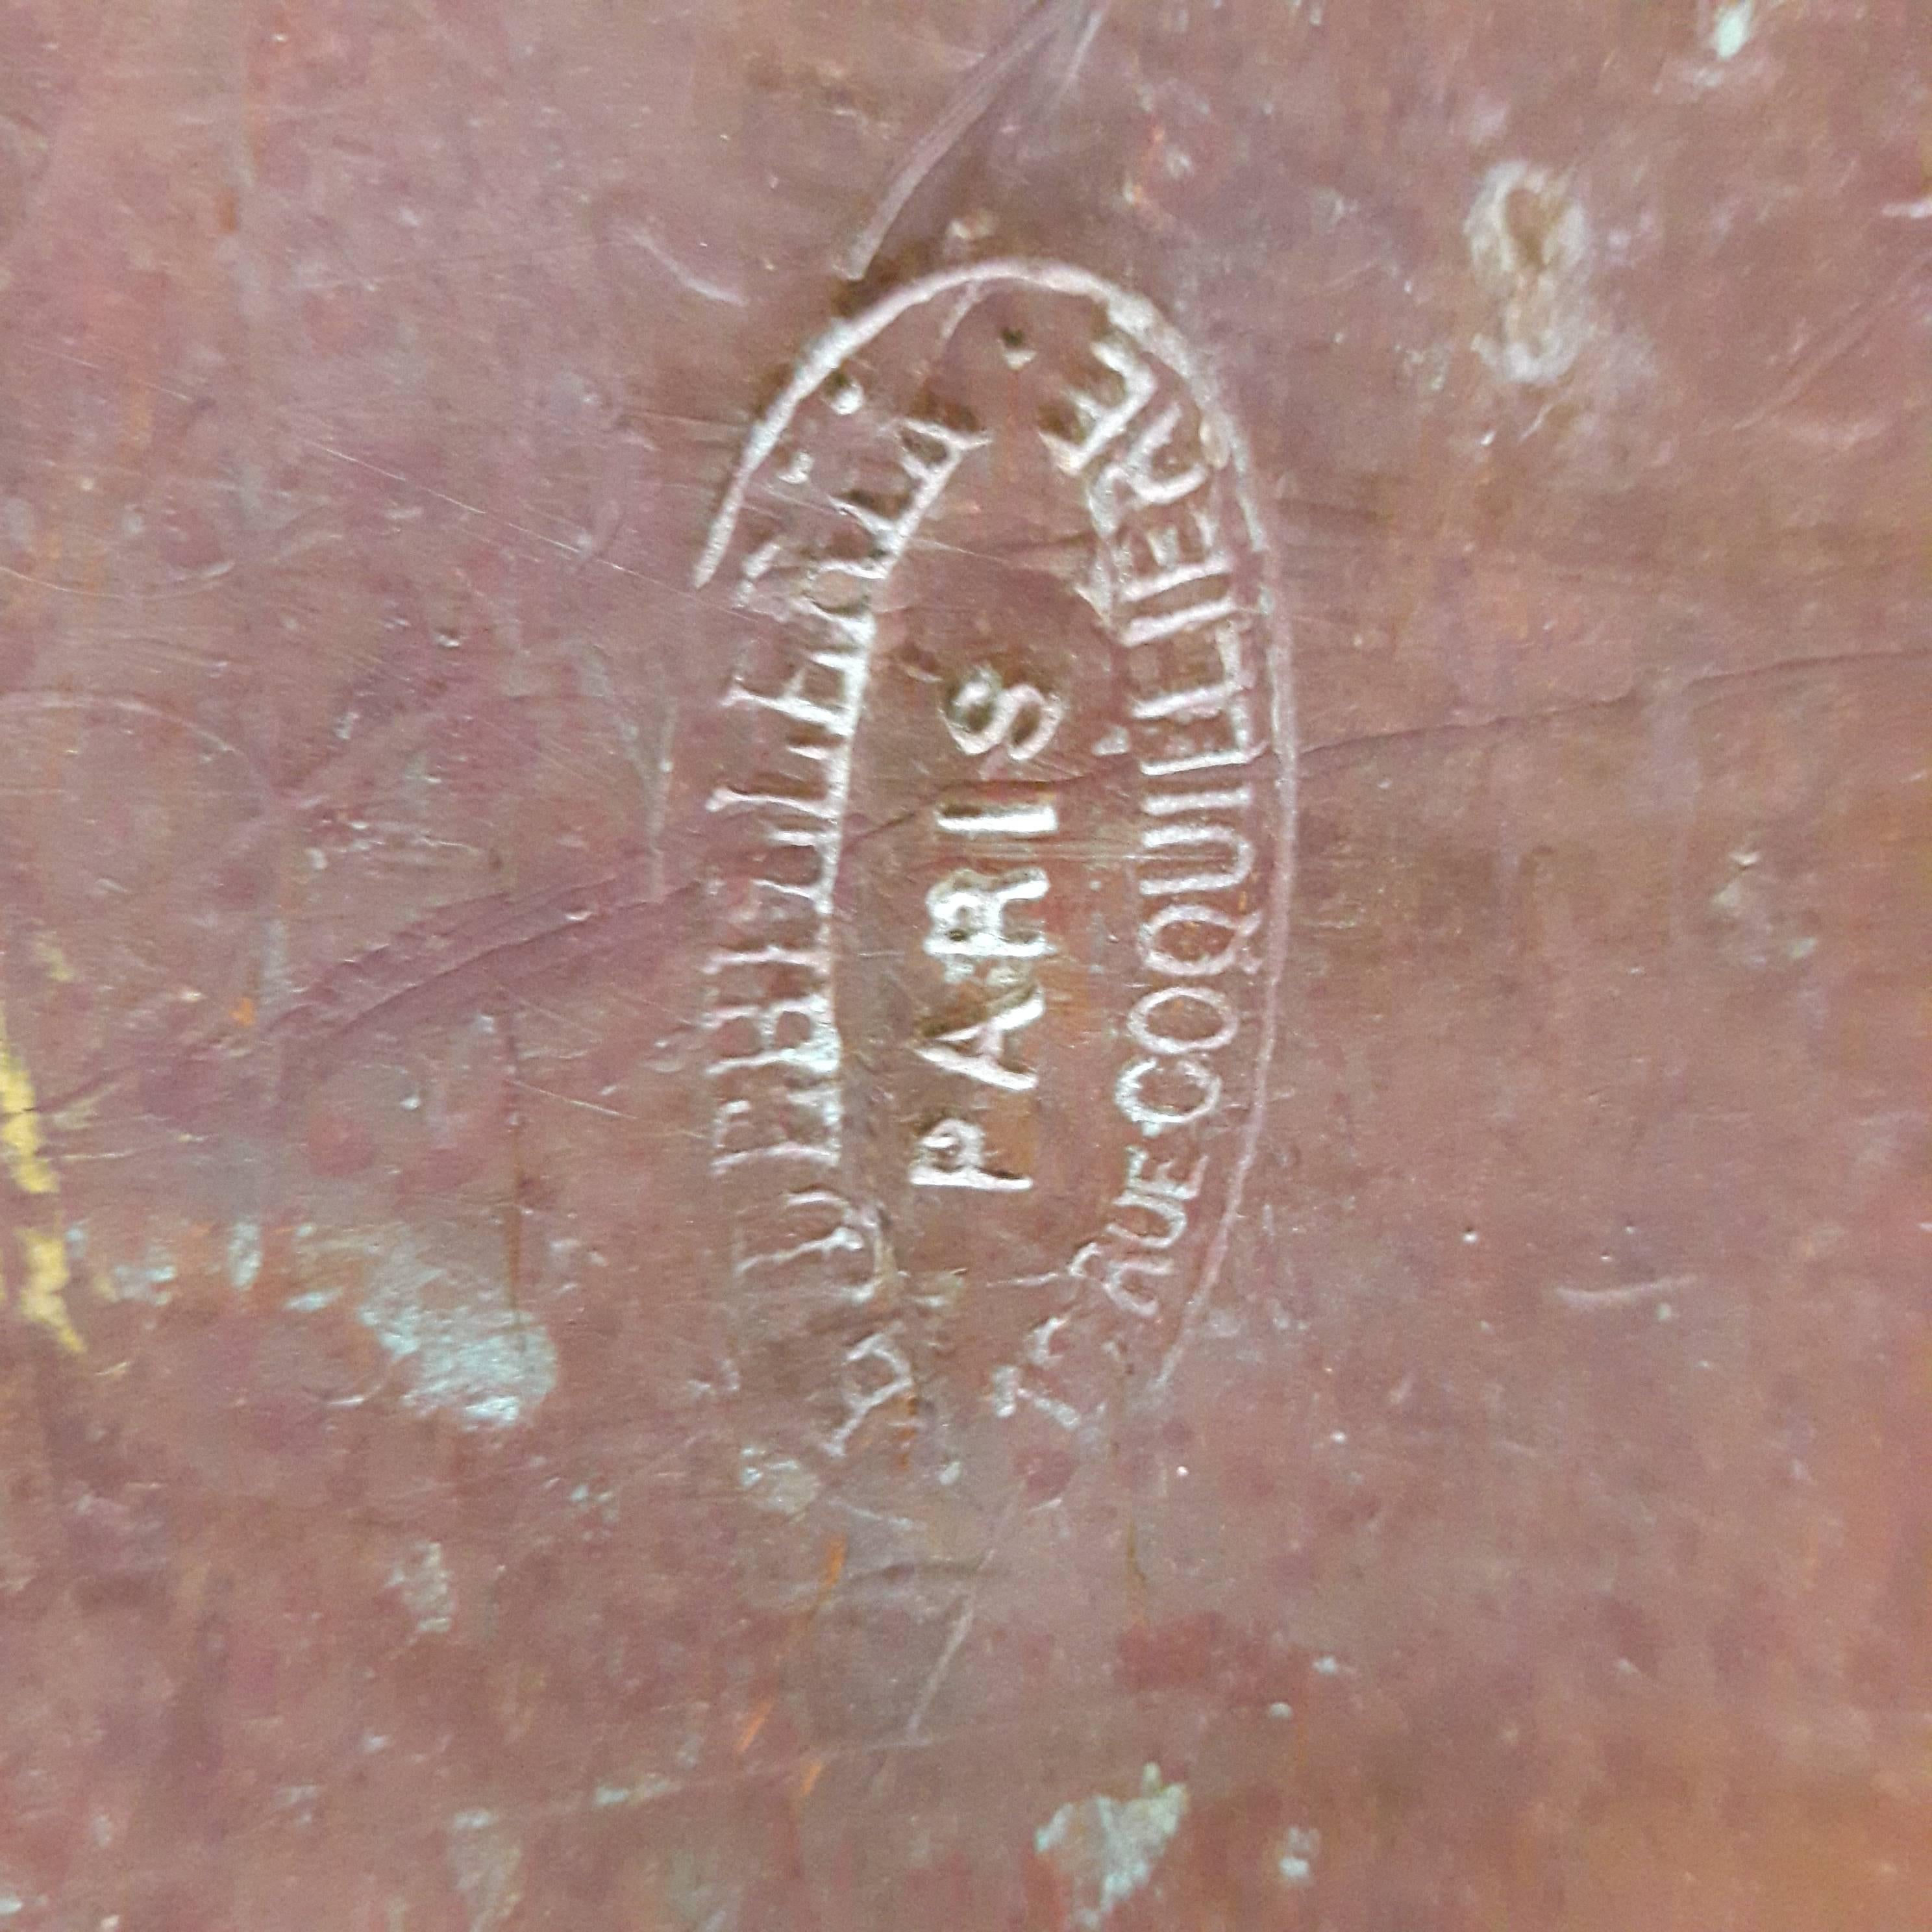 Enormous antique E. Dehillerin of Paris copper stock pot stamped with the makers mark and Savoy Hotel, Cafe and Savoy Grill (see photos). E. Dehillerin has been manufacturing kitchenwares for almost 200 years and is still located at the same address